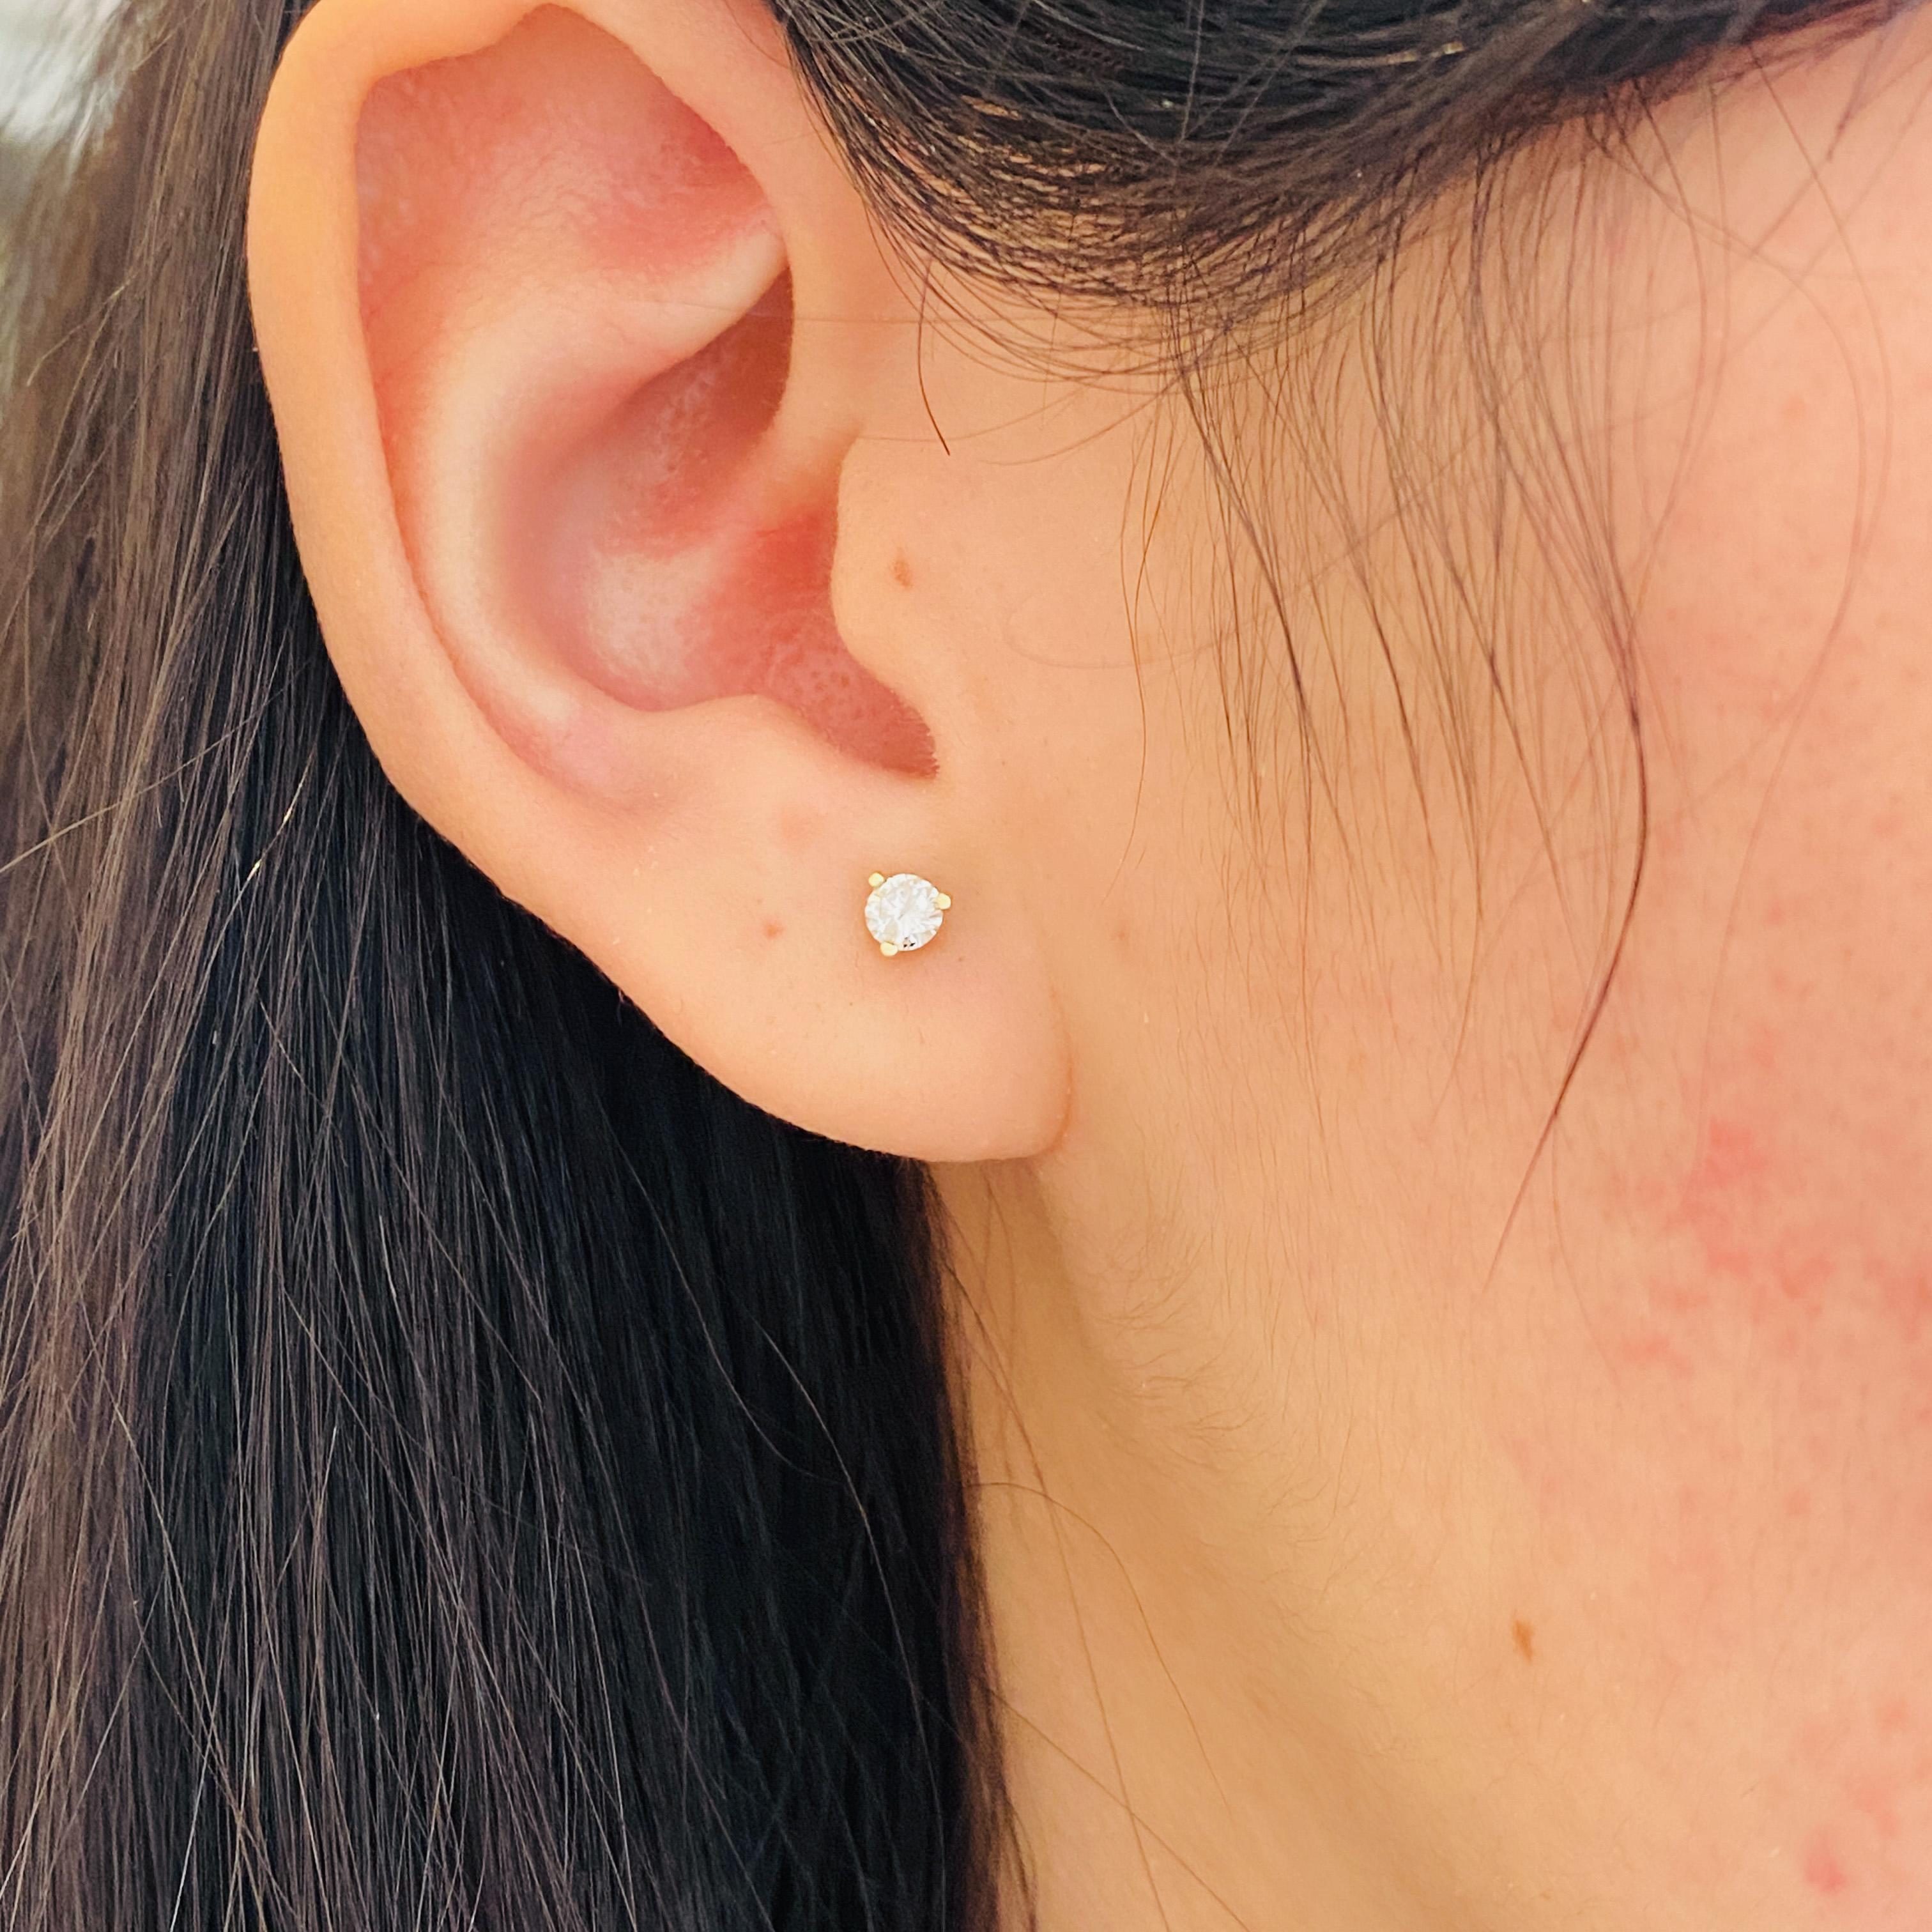 These gorgeous and petite diamond stud earrings are perfect for any ear. They look wonderful whether you wear them alone or as an accent next to larger earrings! Martini studs are popular because they have a low profile close to the ear and still